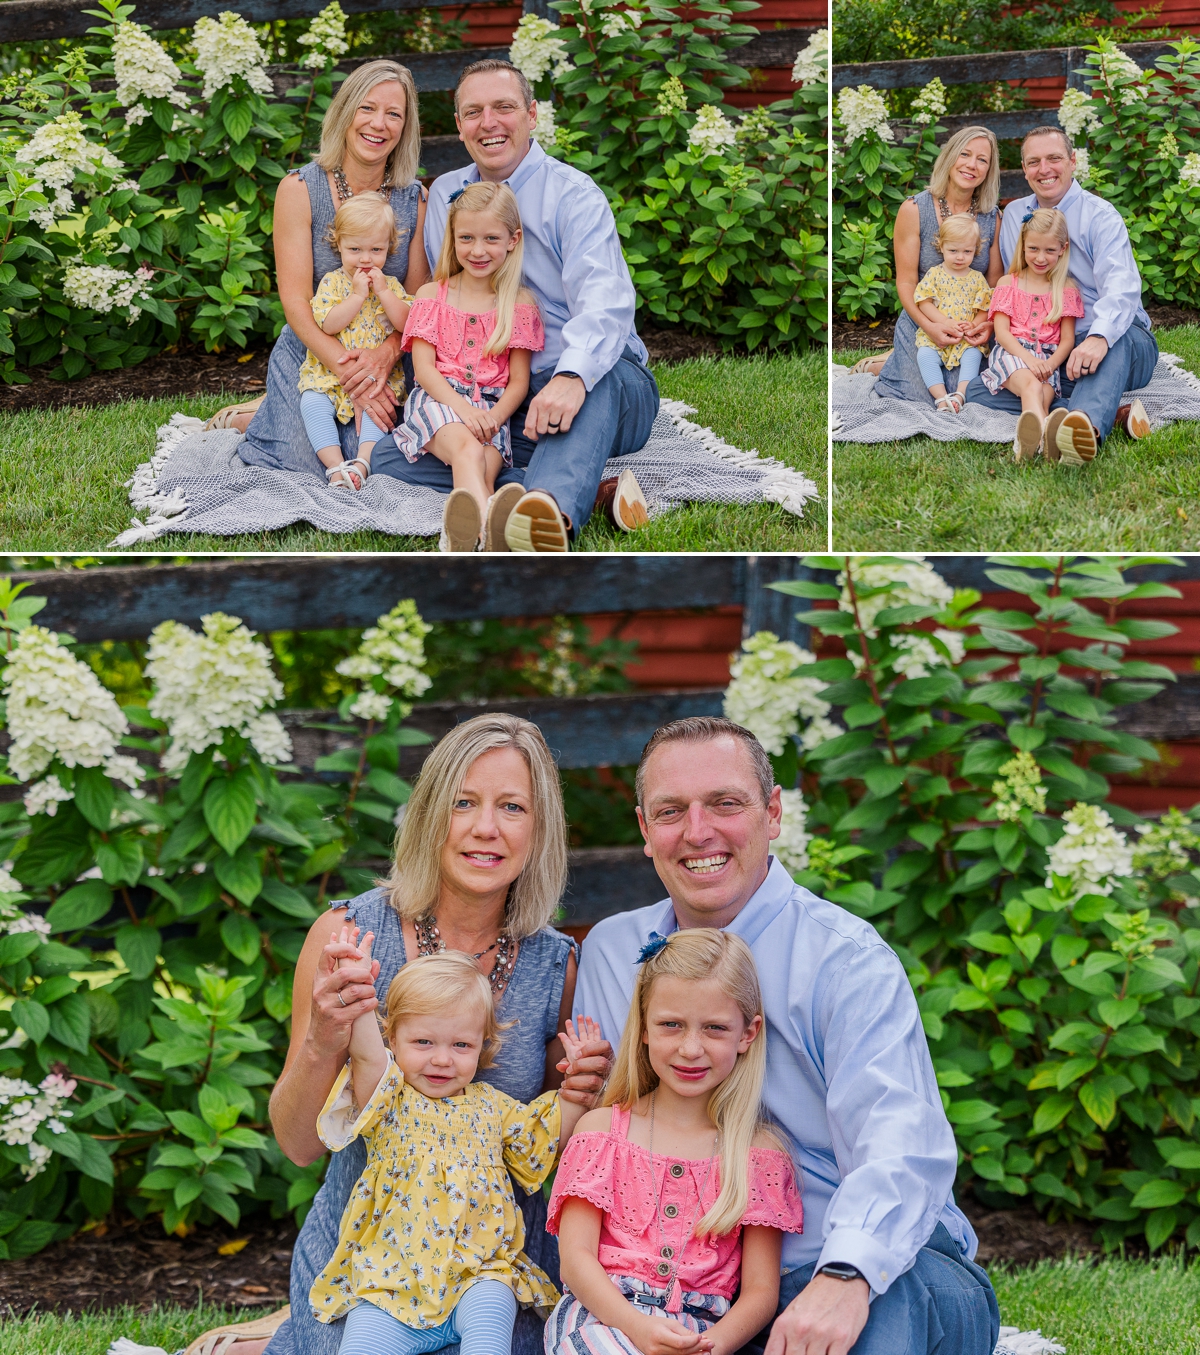 The Somma family sitting for photos in front of some flowering bushes; taken by photographers in Waynesboro VA